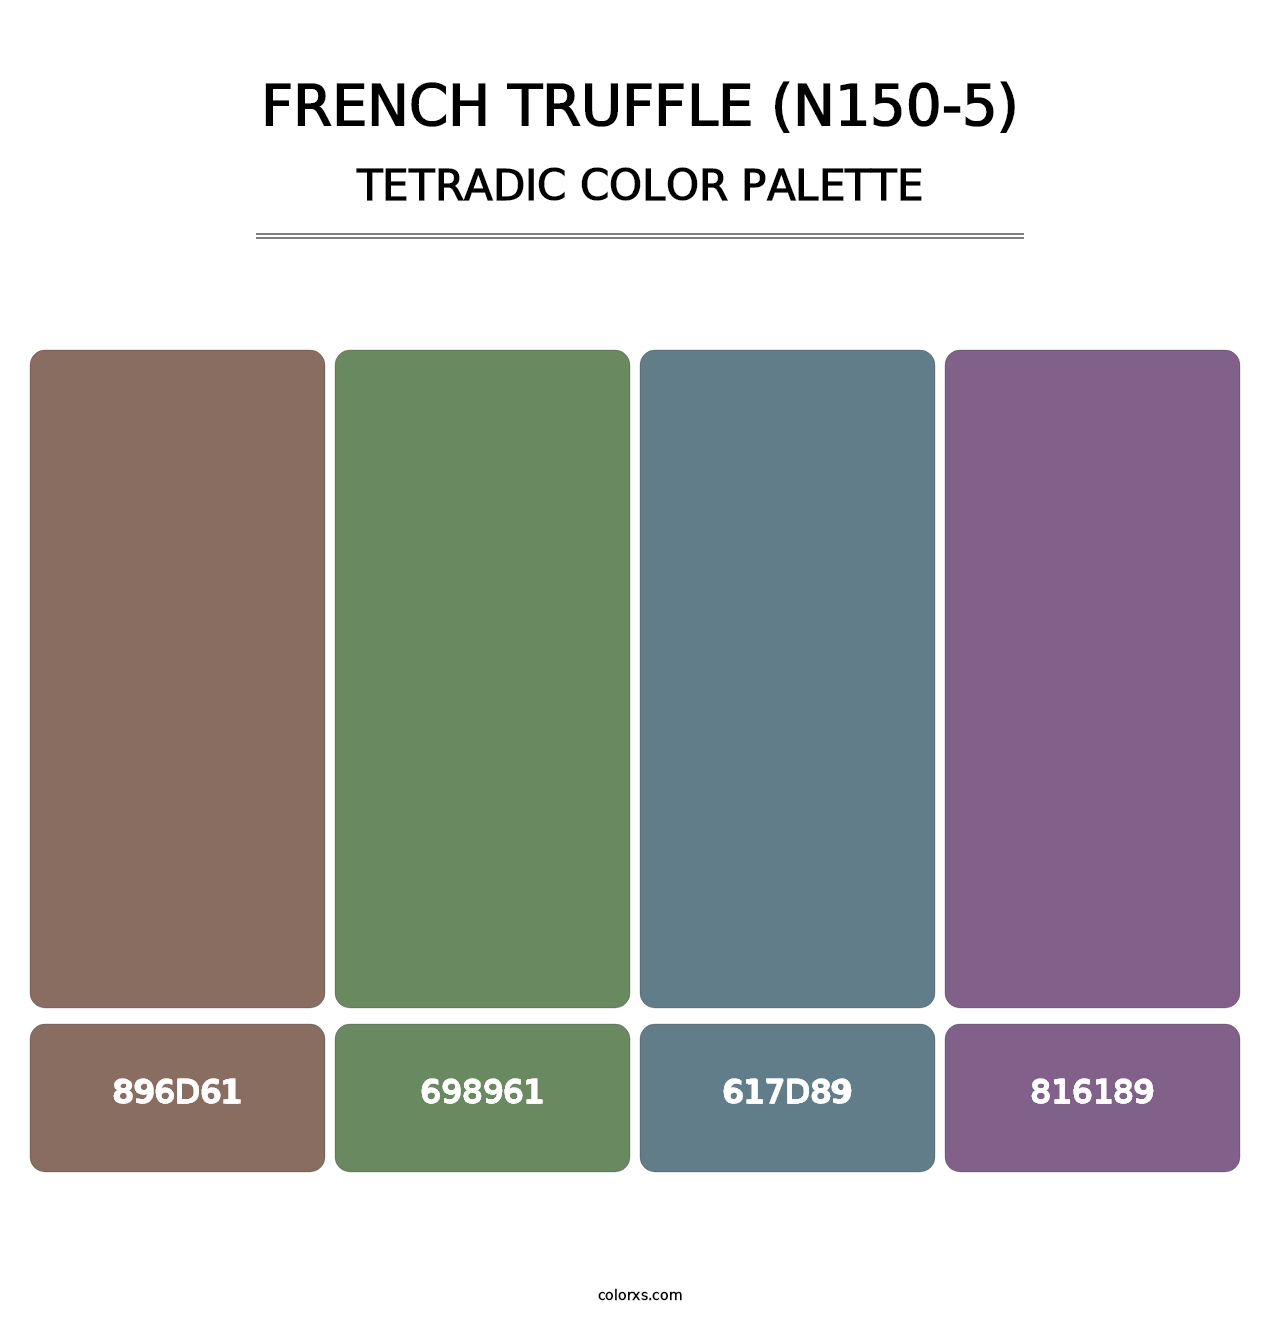 French Truffle (N150-5) - Tetradic Color Palette